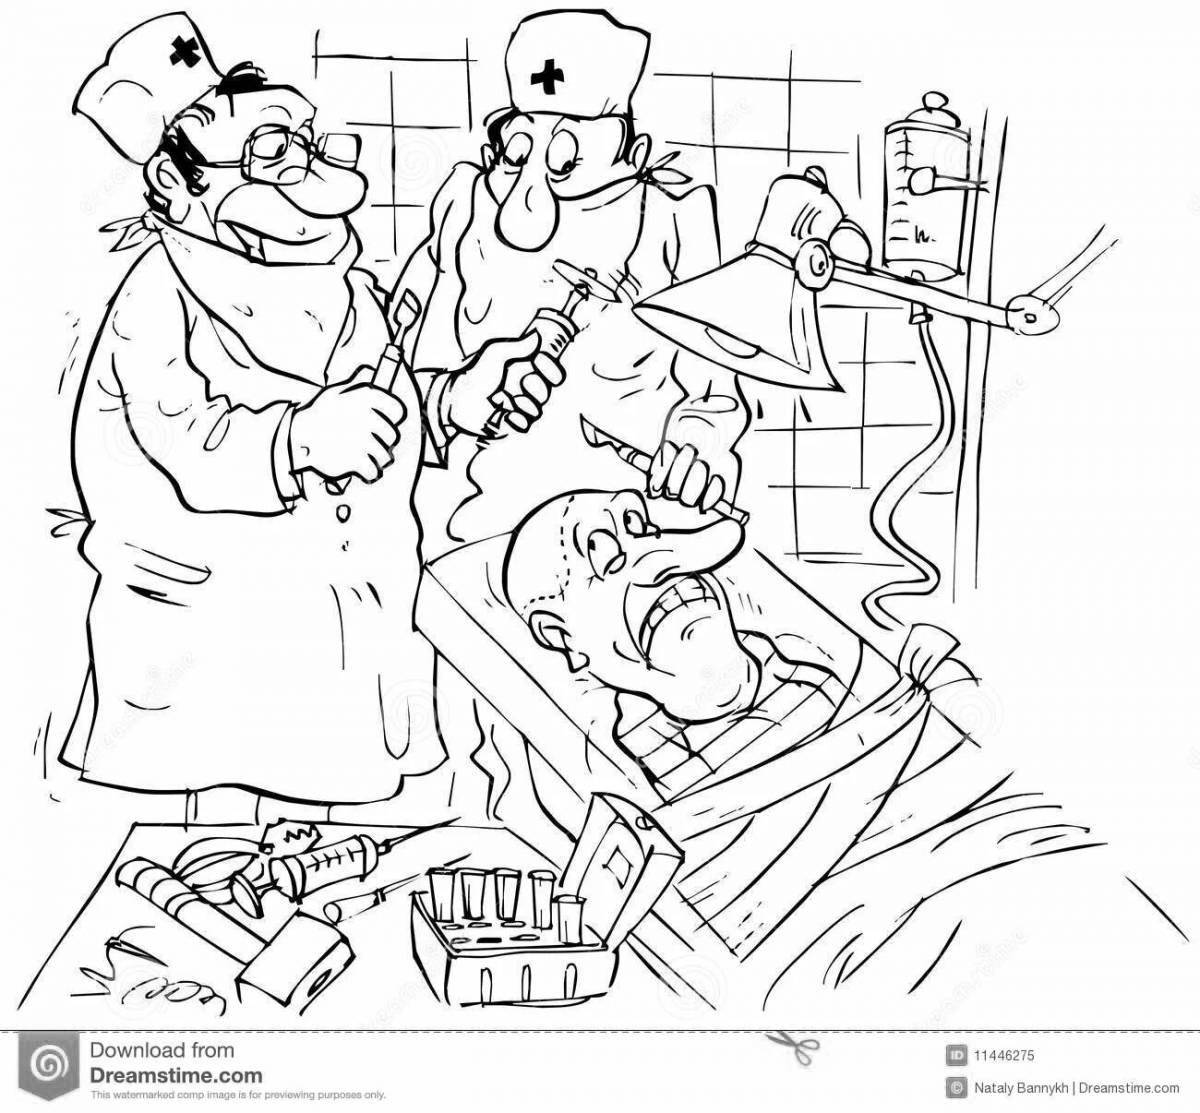 Colorful surgery coloring page